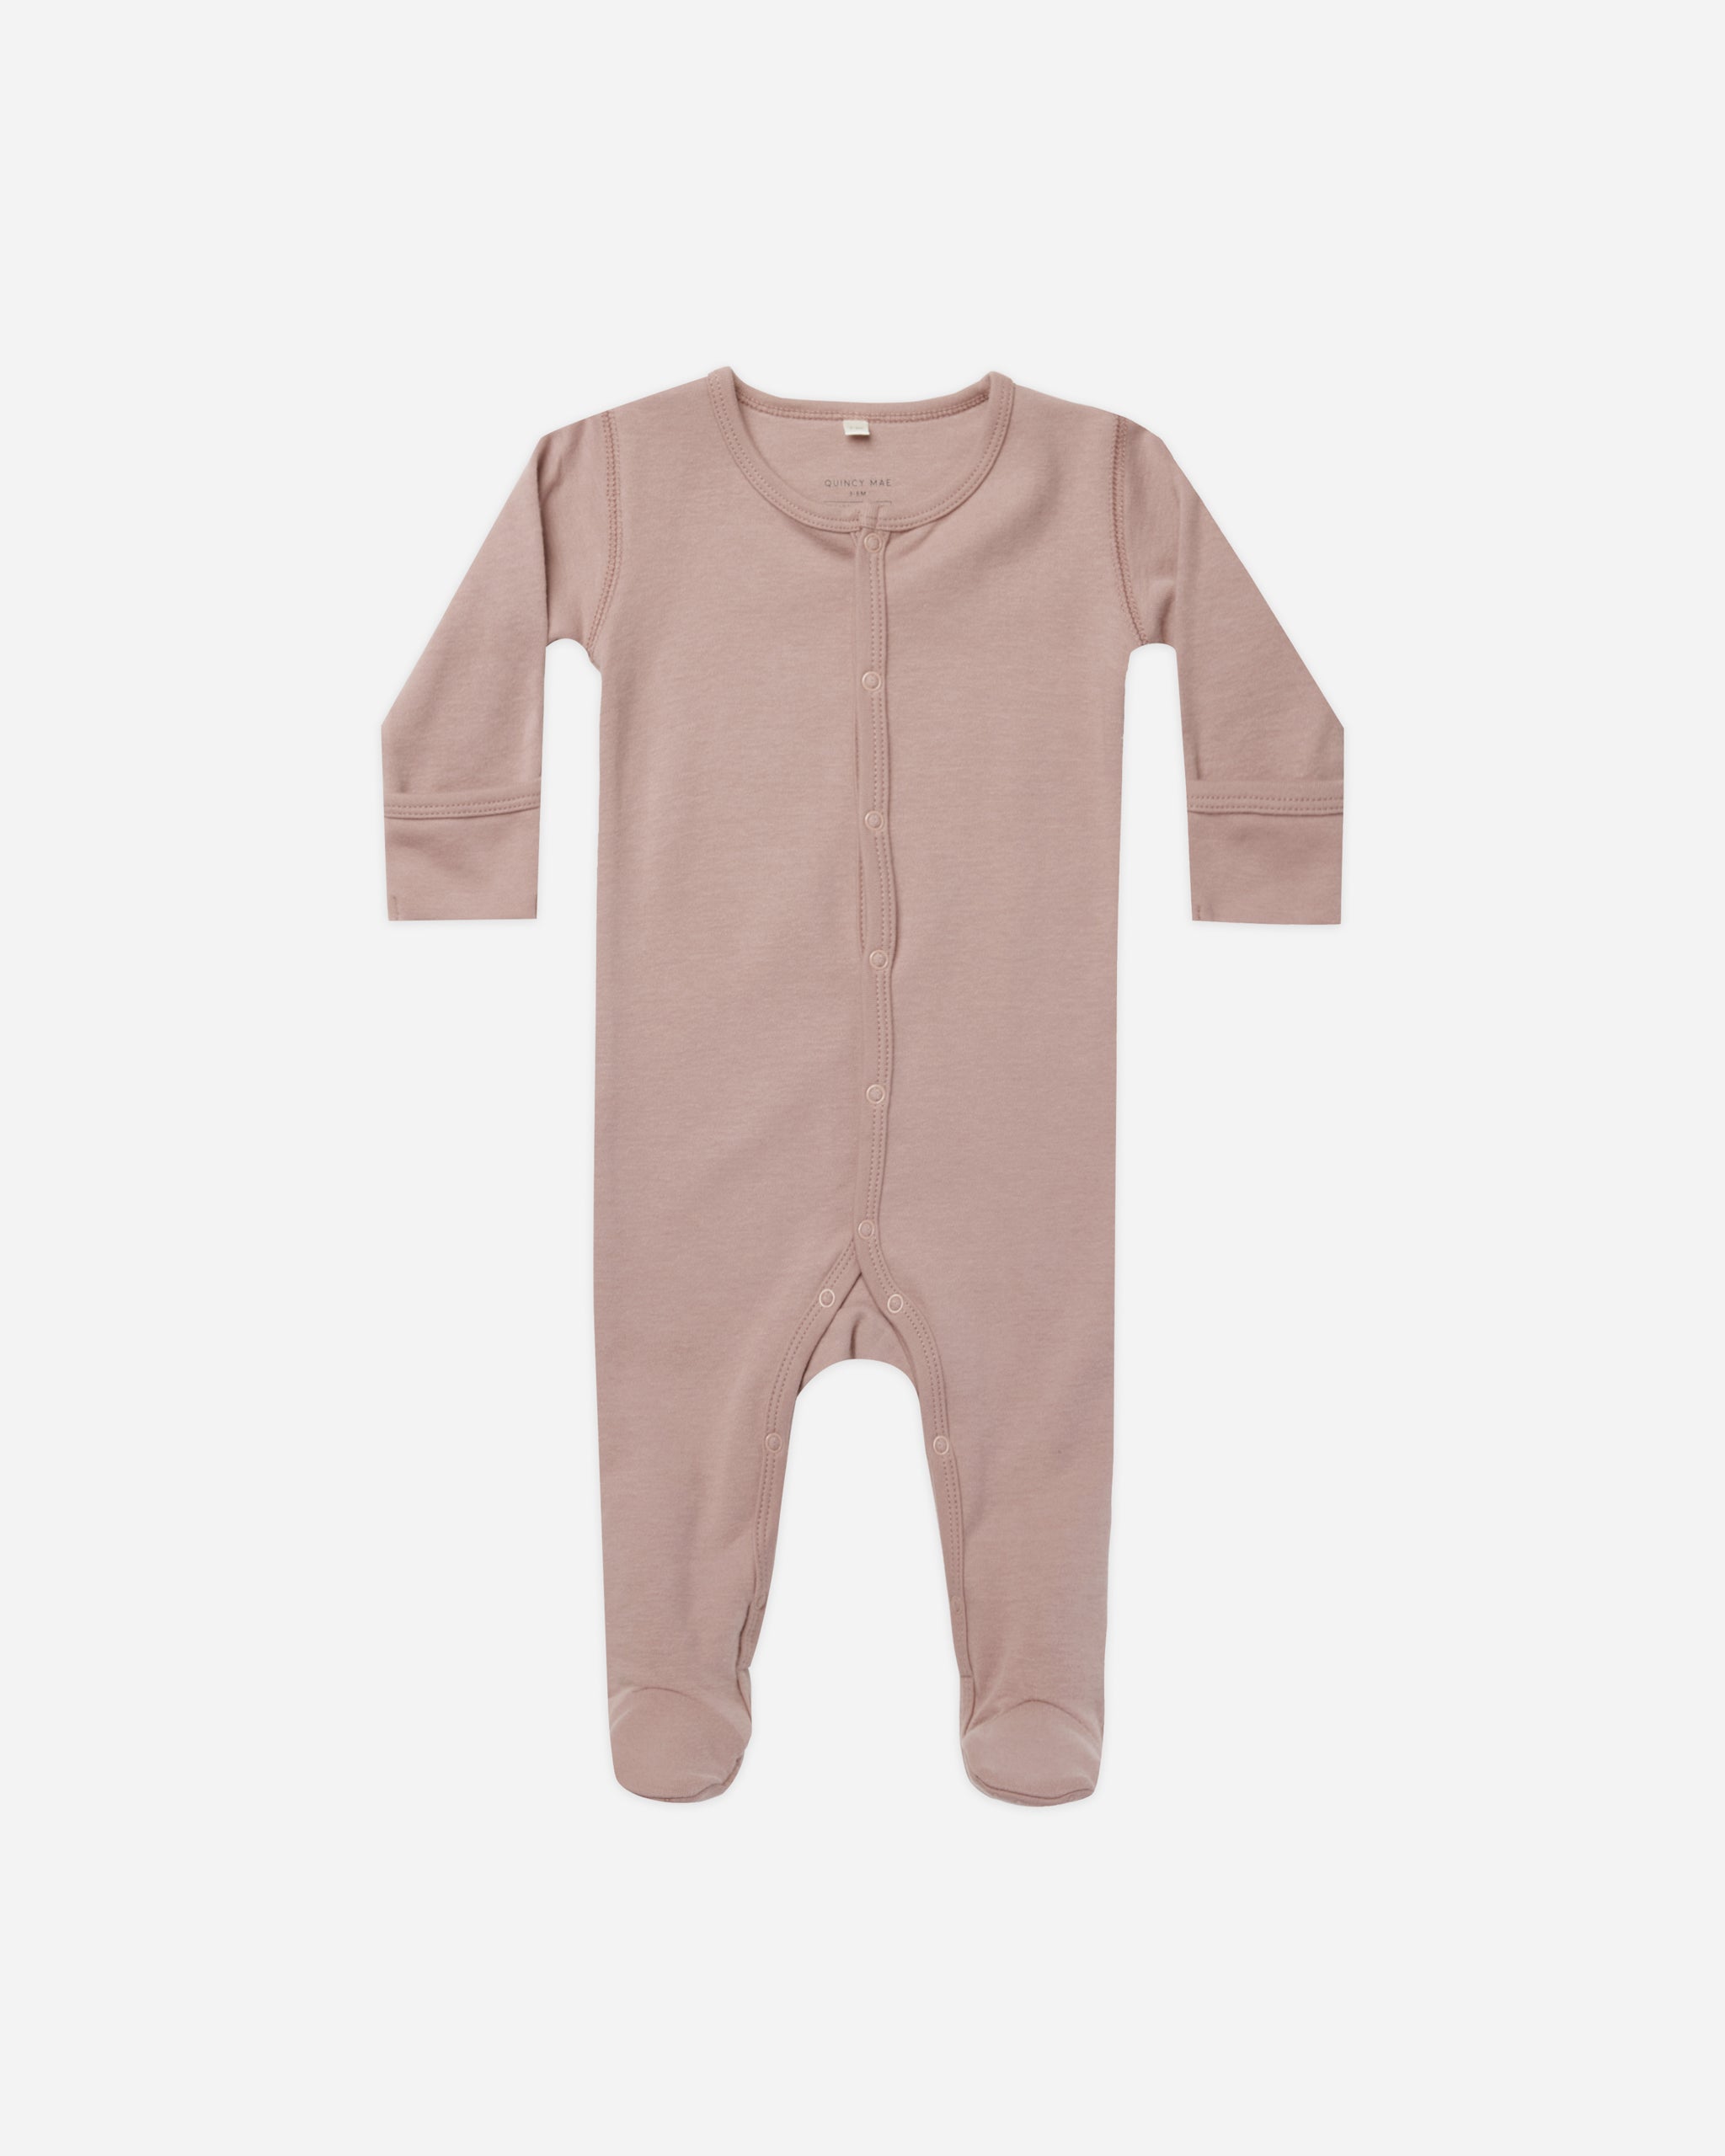 Full Snap Footie || Mauve - Rylee + Cru | Kids Clothes | Trendy Baby Clothes | Modern Infant Outfits |